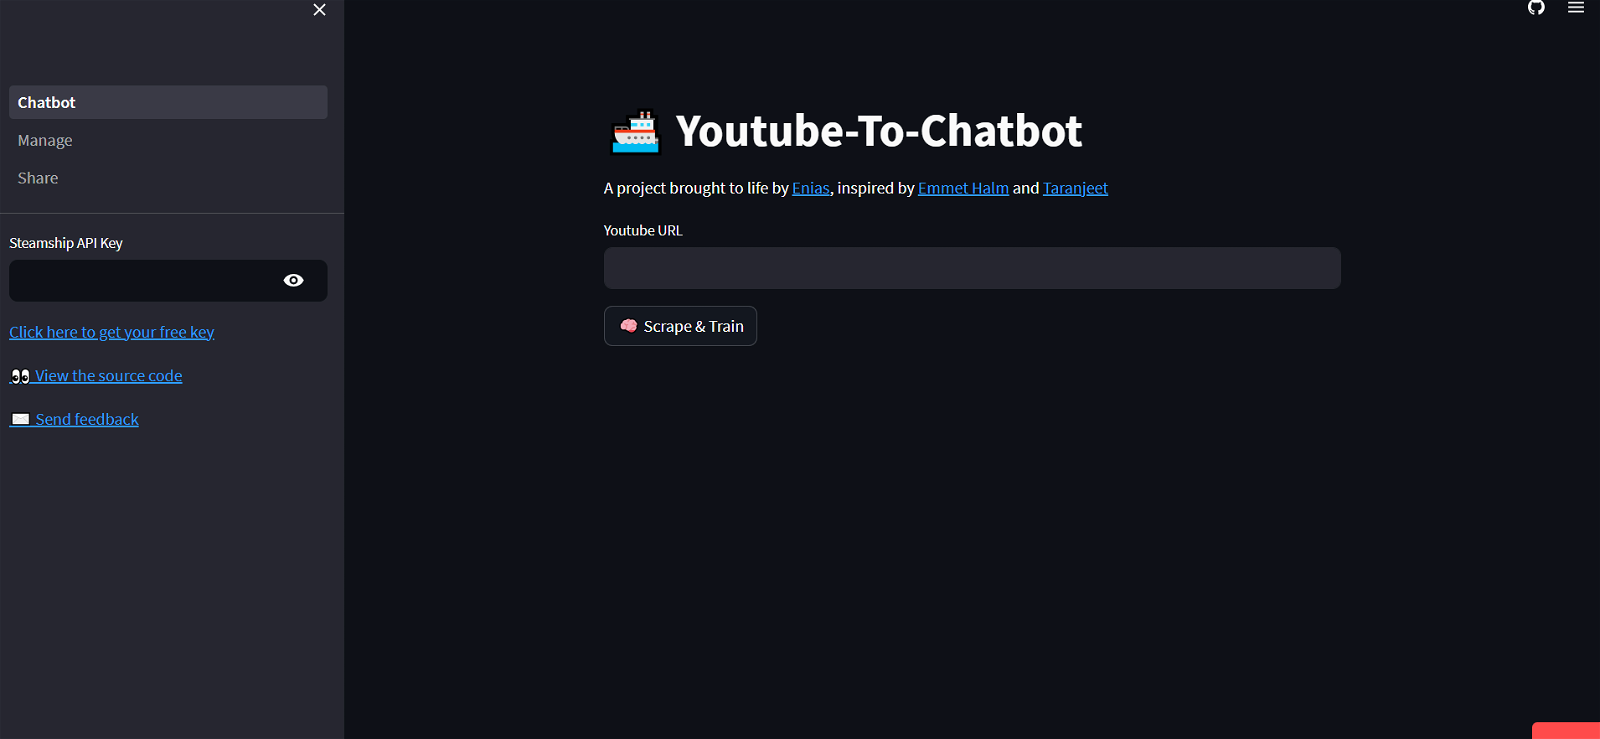 YouTube to Chatbot website